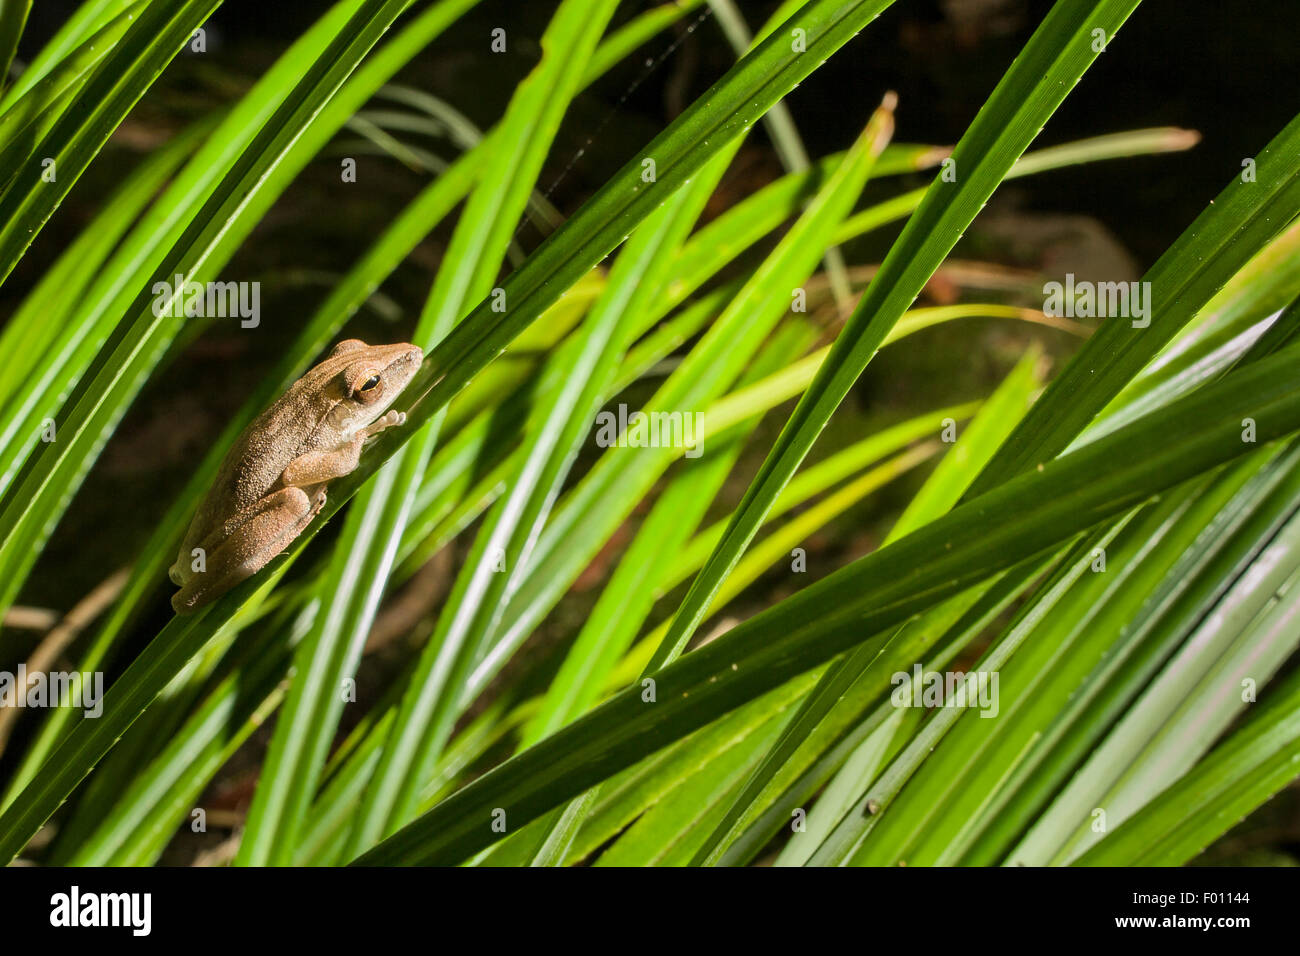 Four-lined tree frog (Polypedates leucomystax) on a leaf at night. Stock Photo